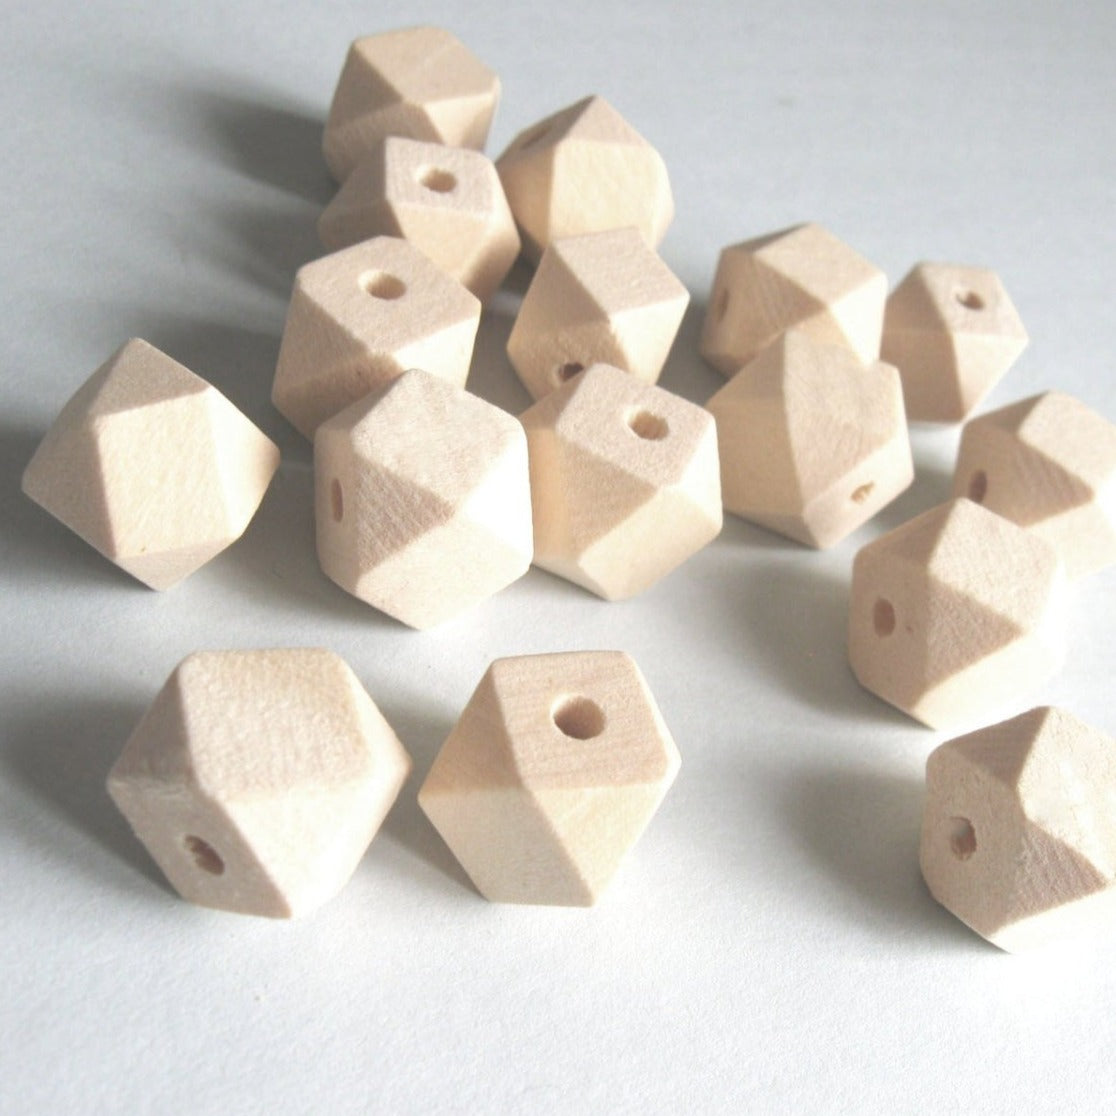 Faceted hexagon wood beads, Big geometric beads for jewelry making